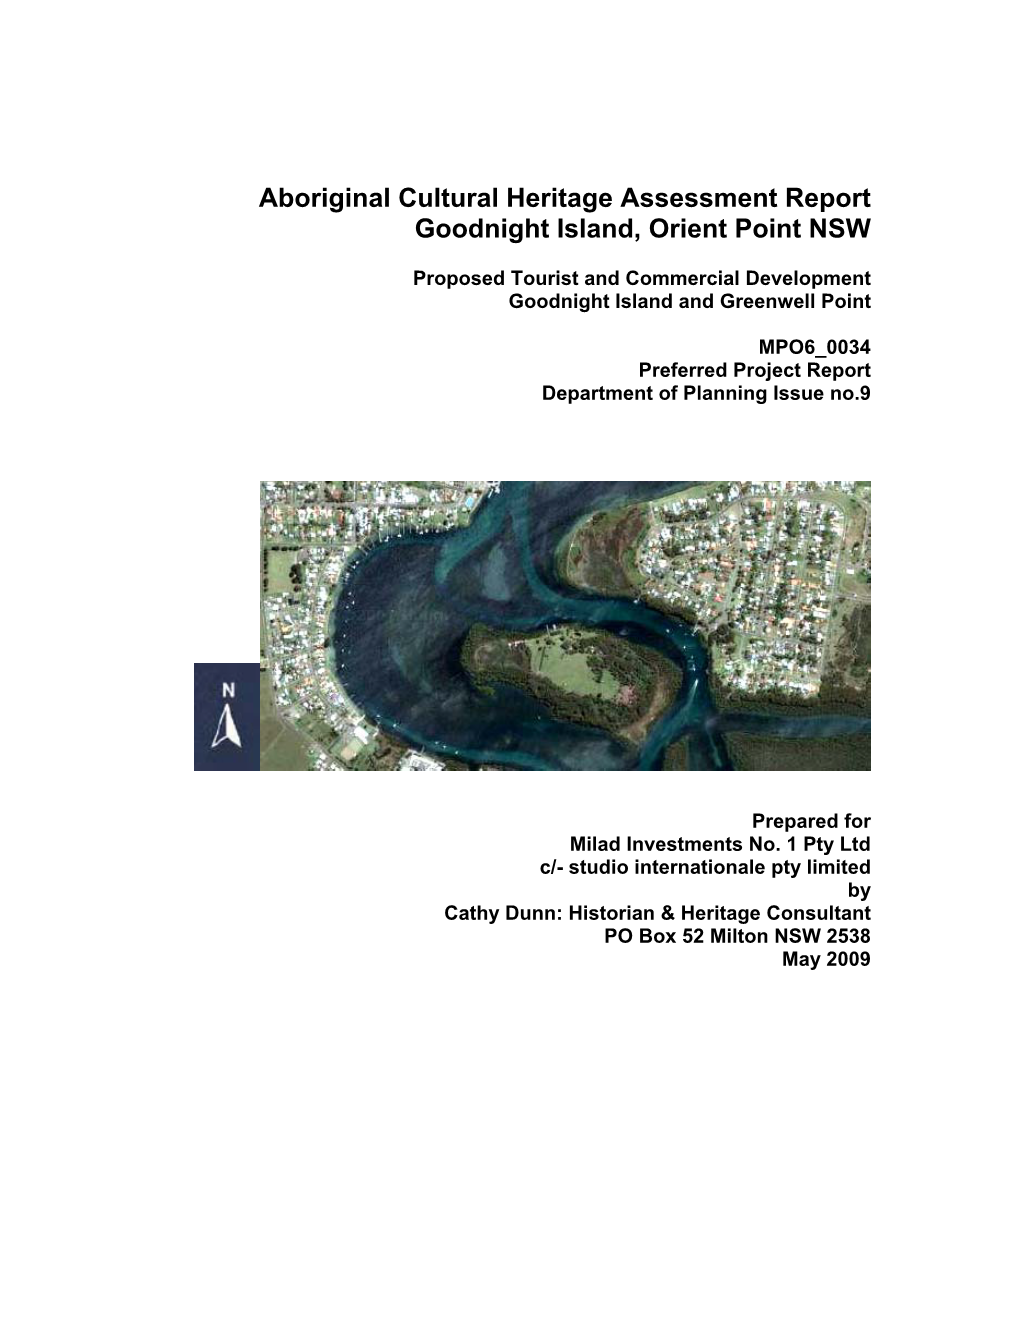 Aboriginal Cultural Heritage Assessment Report Goodnight Island, Orient Point NSW